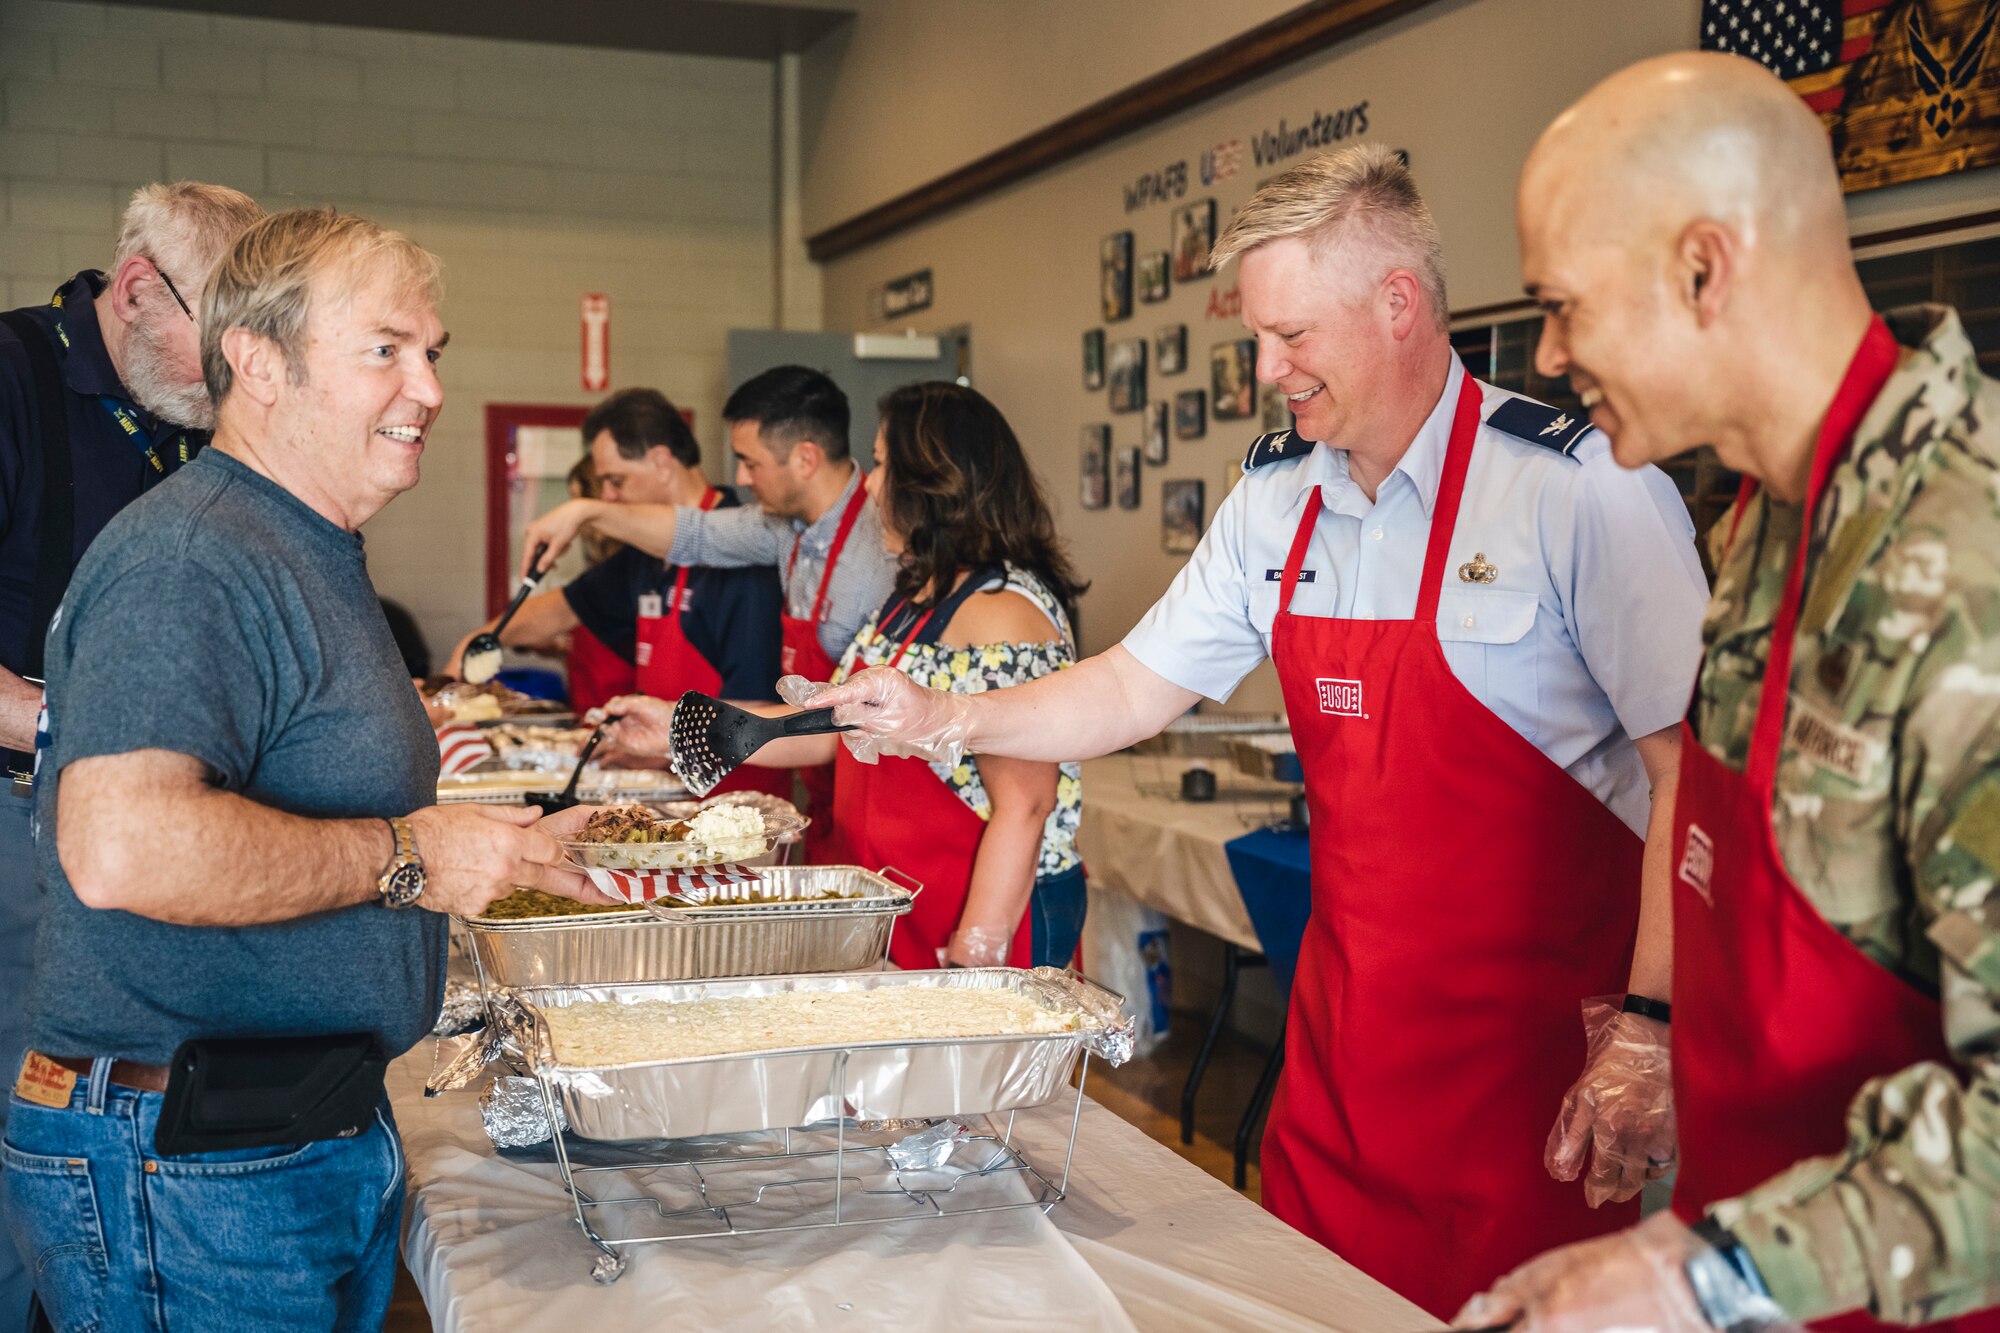 Col. Charles Barkhurst, 88th Air Base Wing vice commander, and Chief Master Sgt. Lloyd Morales, 88th Air Base Wing command chief, serve volunteers during the annual USO volunteer appreciation dinner at Wright-Patterson Air Force Base, Ohio, April 20.